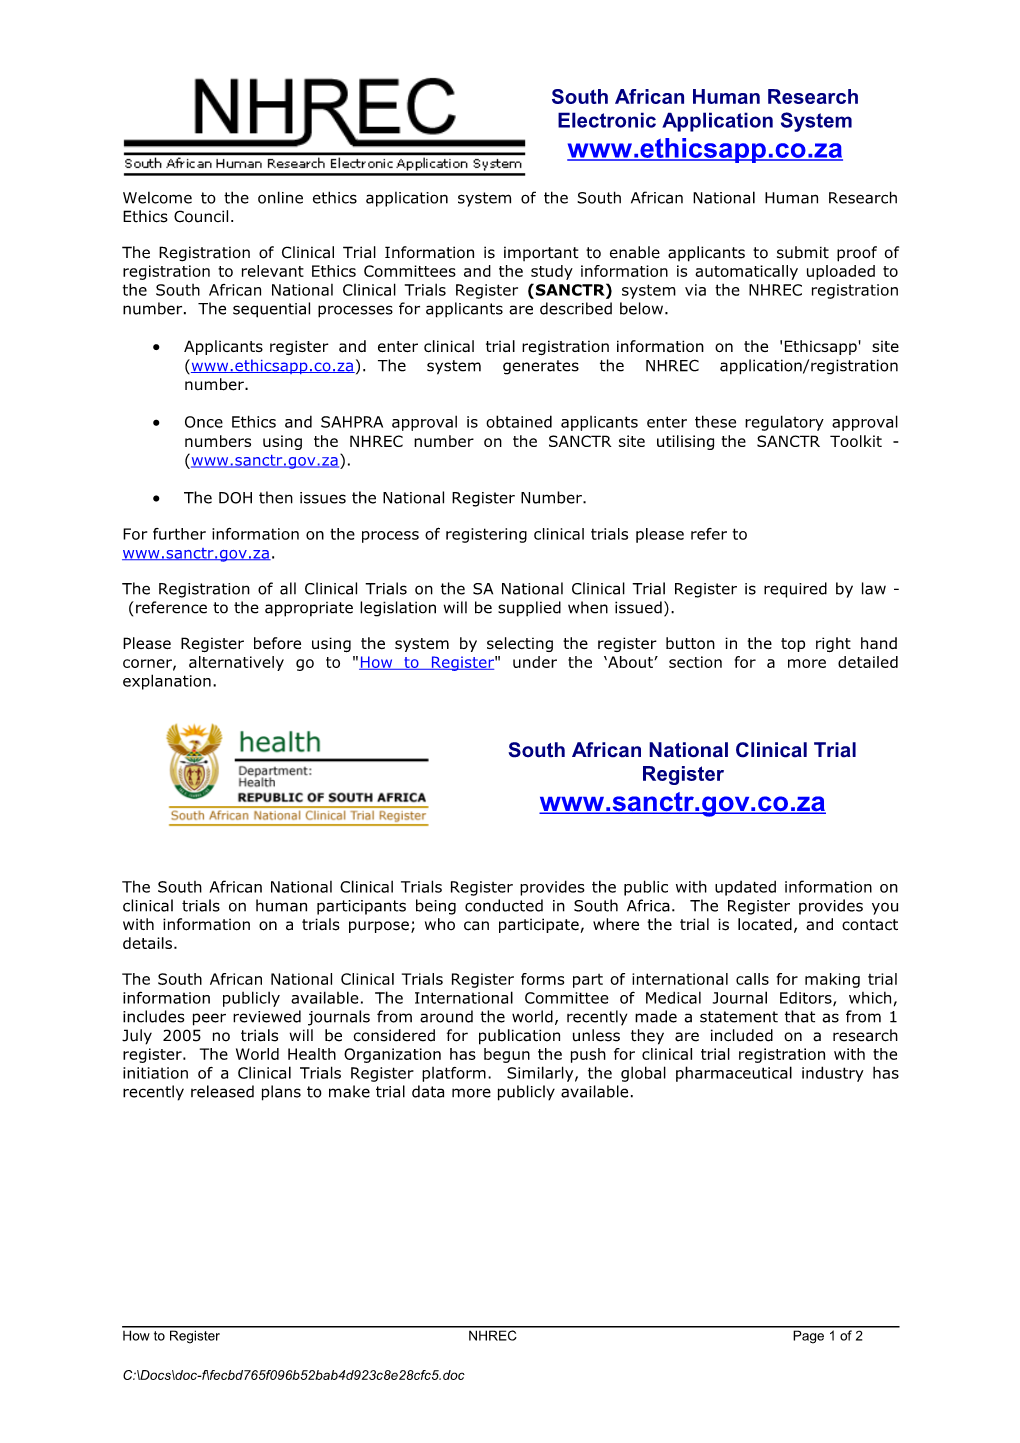 Welcome to the Online Ethics Application System of the South African National Human Research